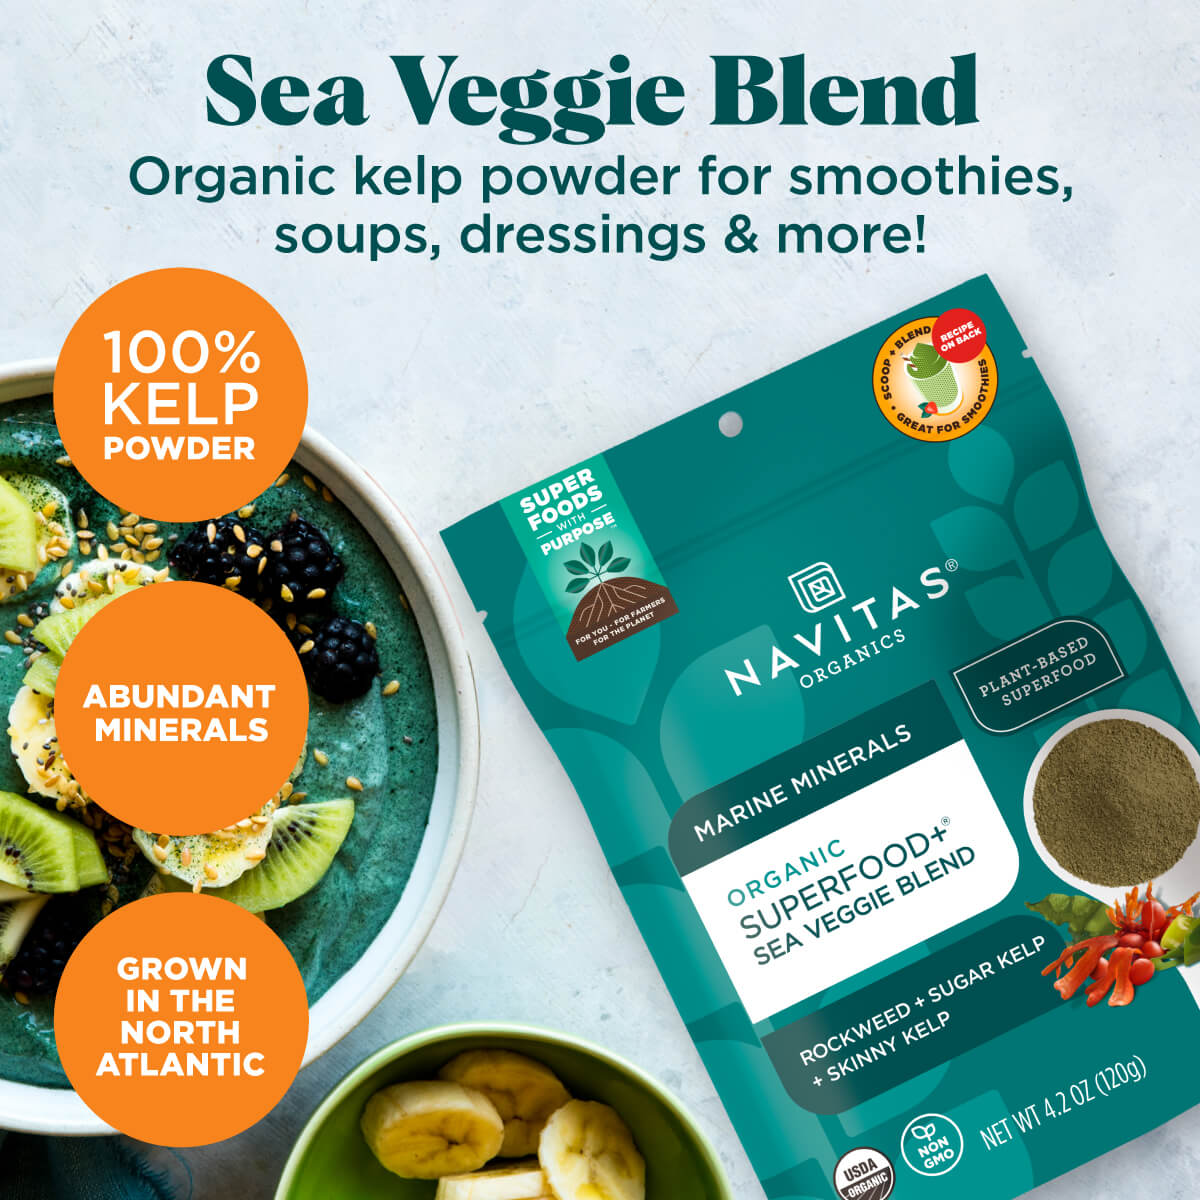 Navitas Organics Superfood+ Sea Veggie Blend is 100% organic kelp powder for smoothies, soups, dressings & more! It's abundant in minerals and grown in the North Atlantic.